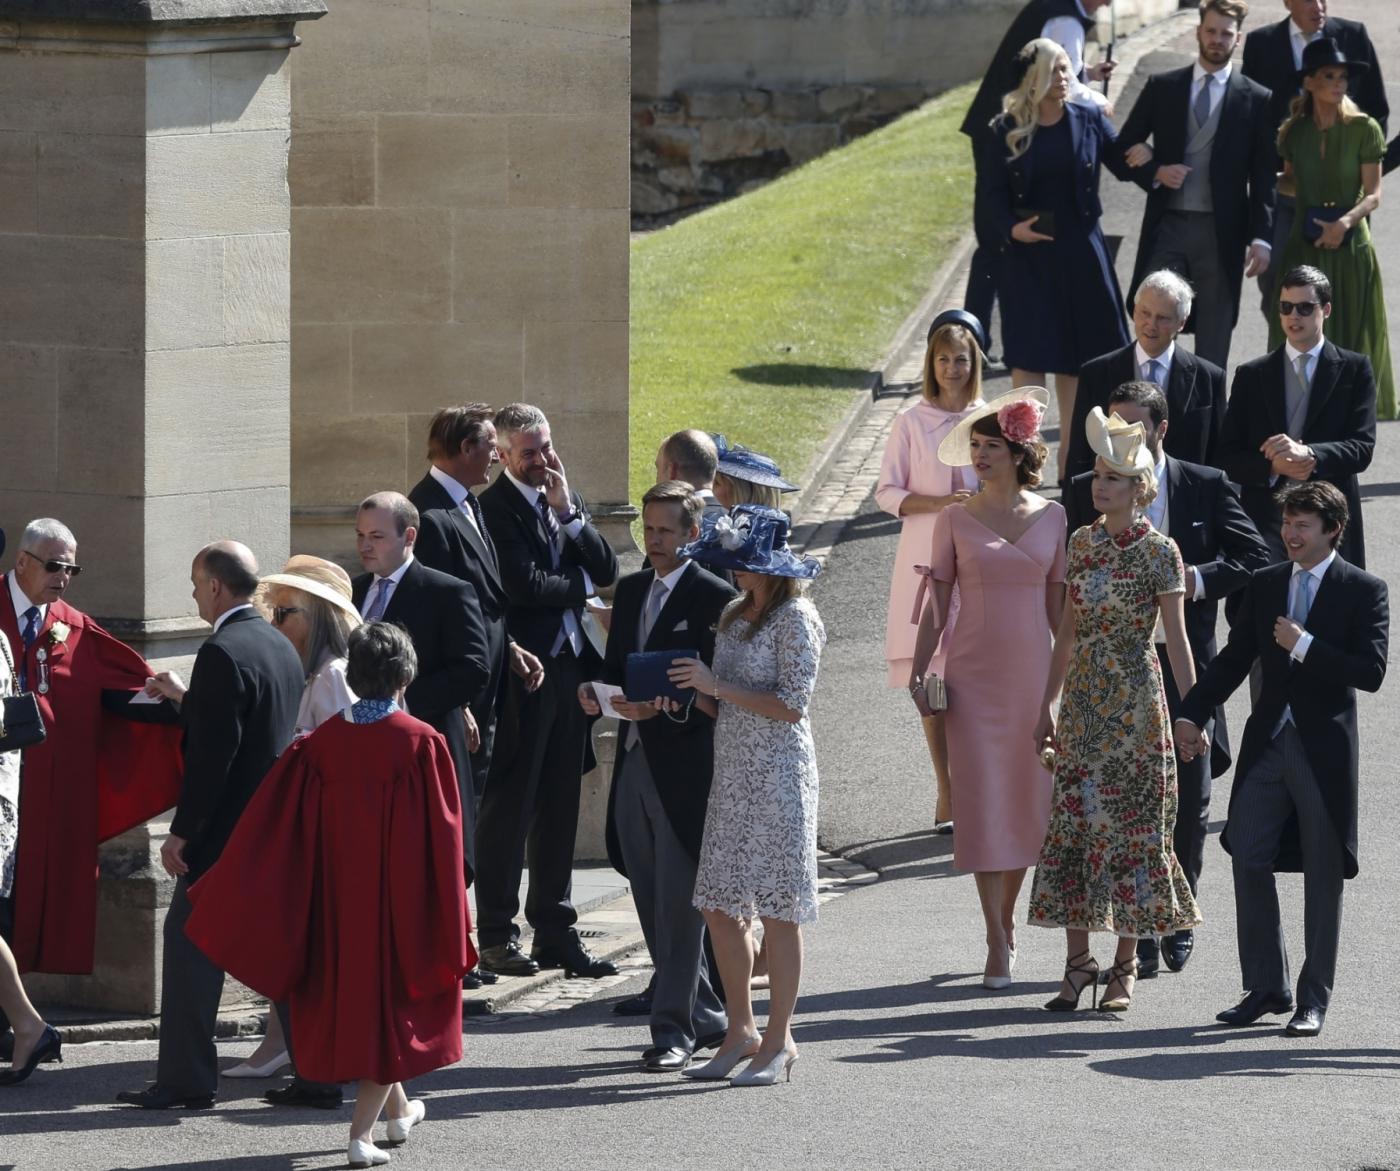 WINDSOR, May 19, 2018 (Xinhua) -- Guests arrive at St. George's Chapel in Windsor Castle for the royal wedding of Prince Harry and his bride Meghan Markle in Windsor, Britain, on May 19, 2018. (Xinhua/Han Yan/IANS) by . 